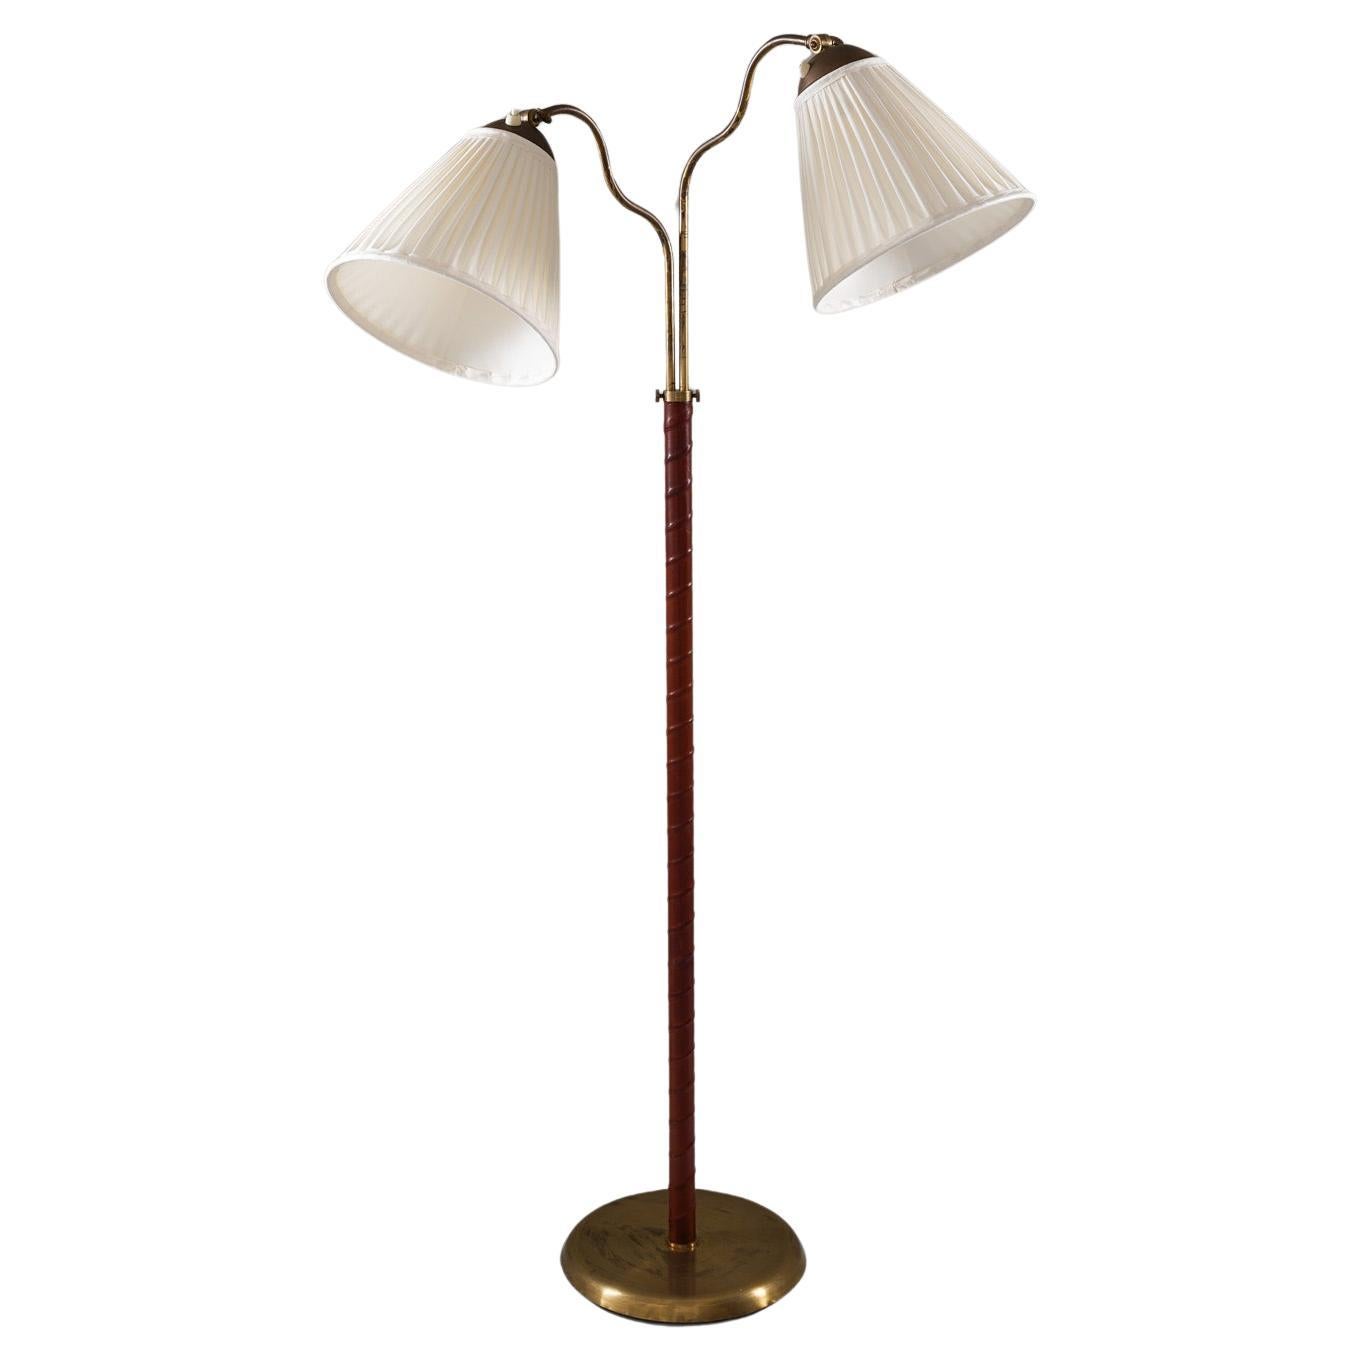 Swedish Modern Floor Lamp in Brass and Leather, 1940s